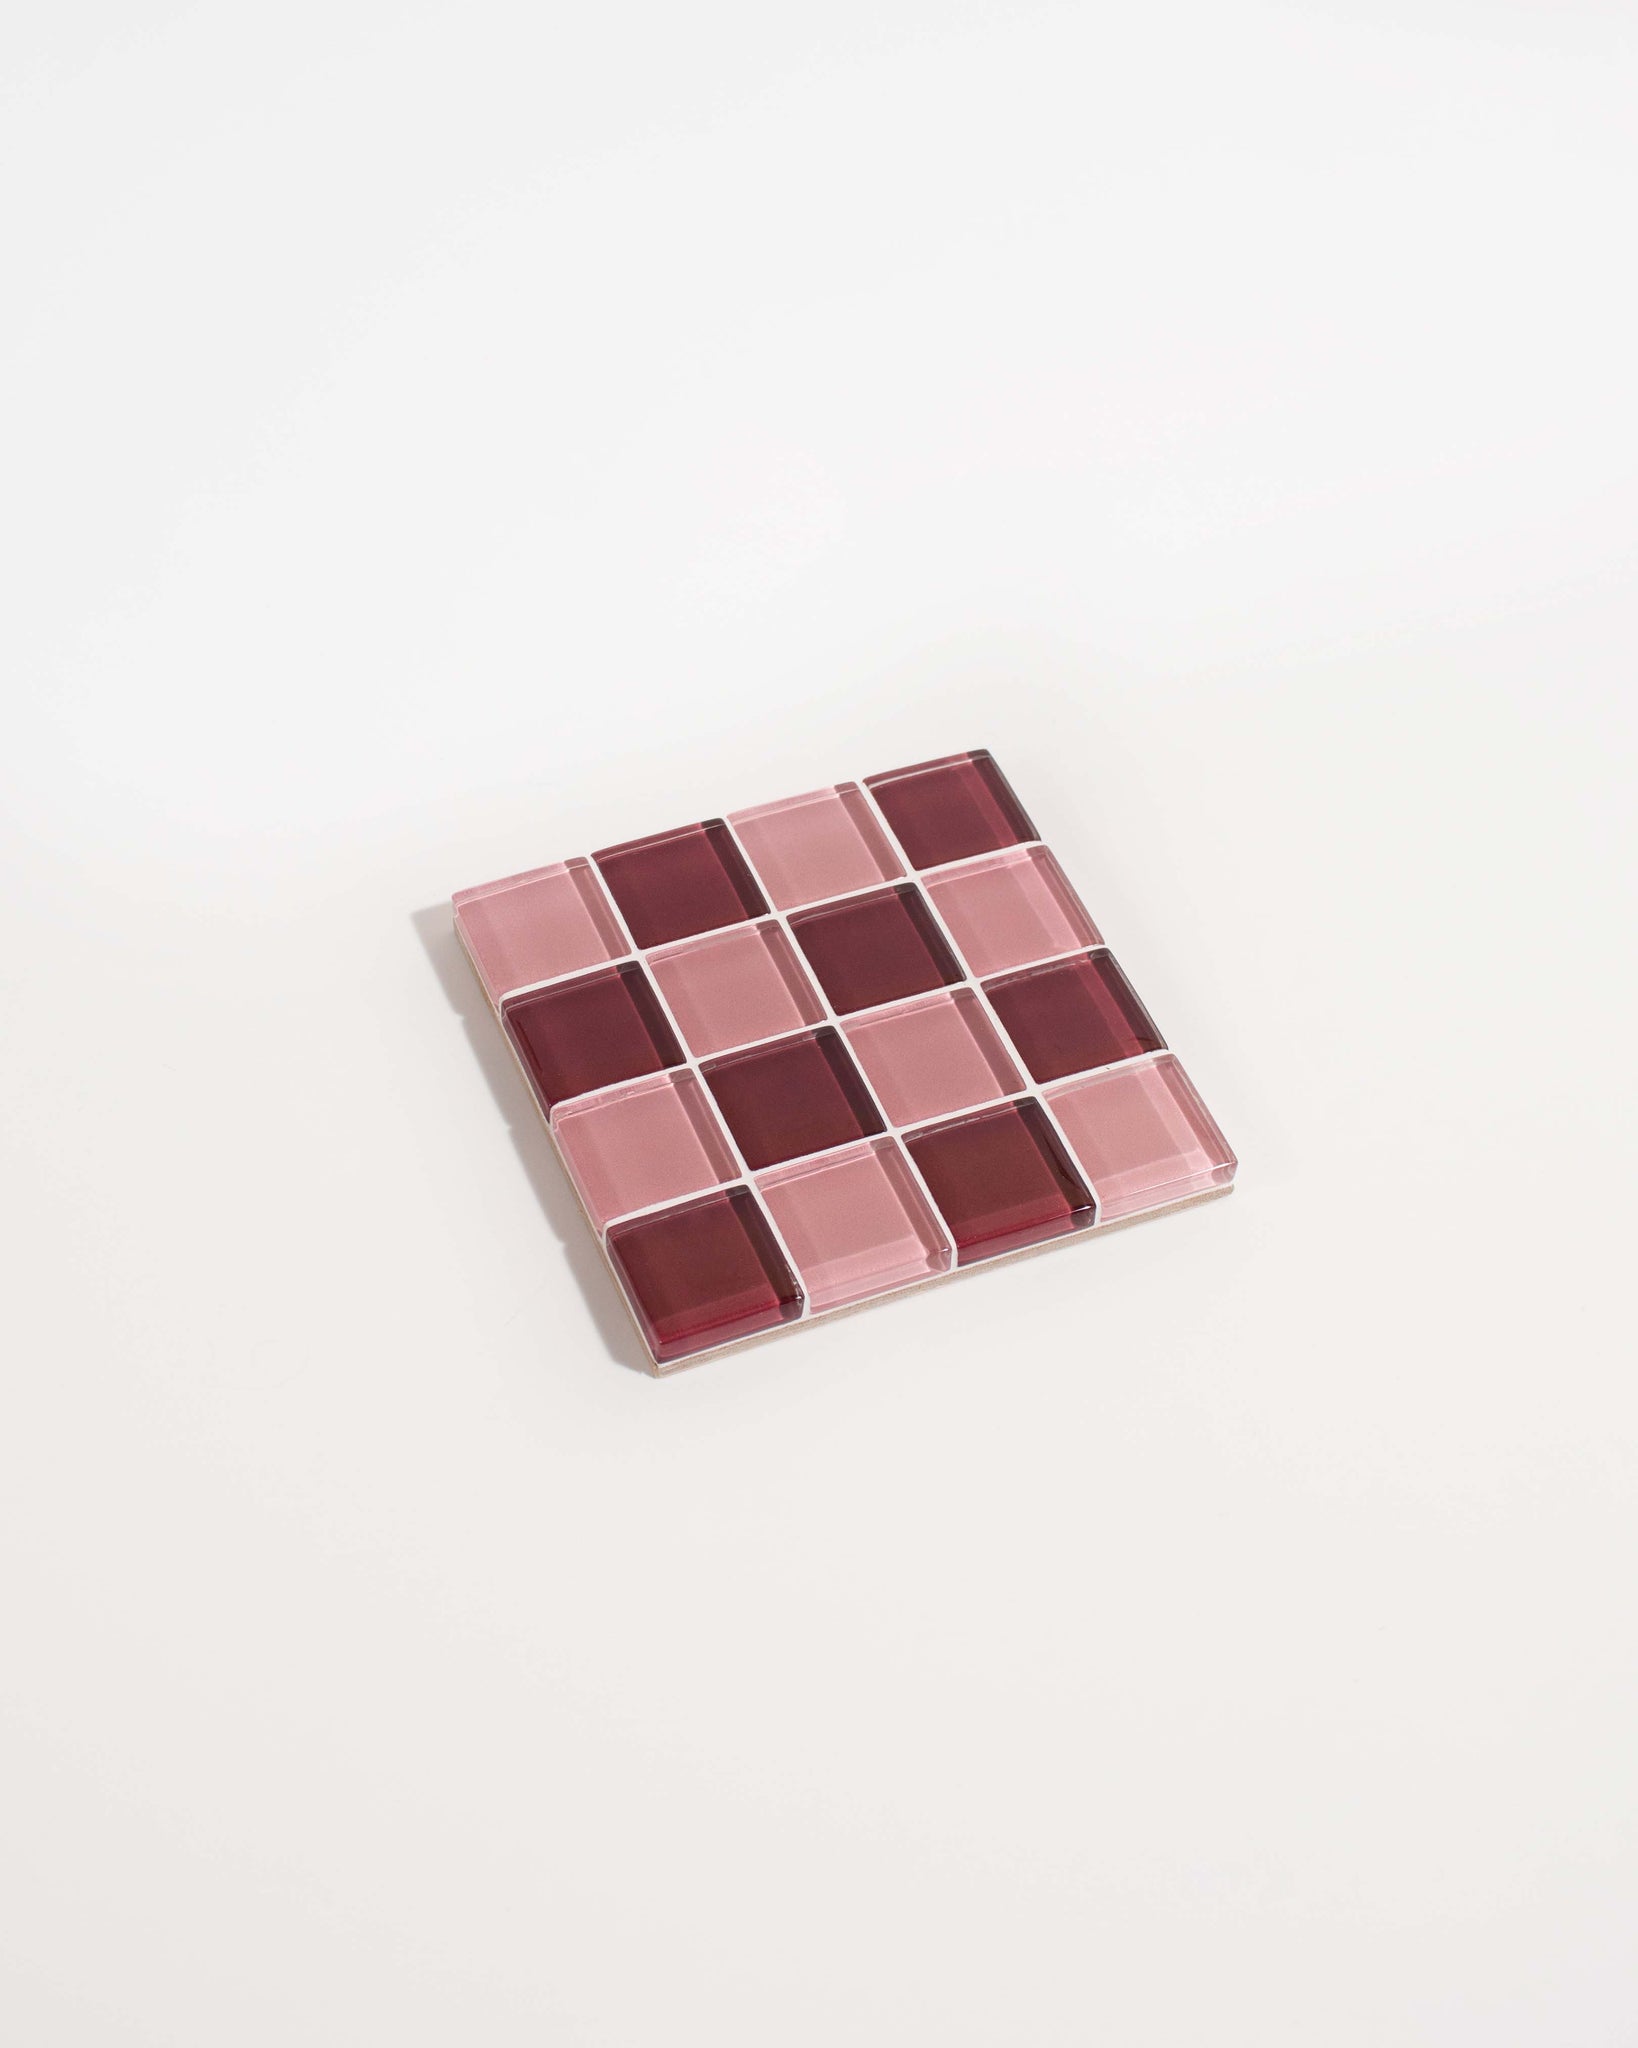 GLASS TILE COASTER - The Sweetest Love